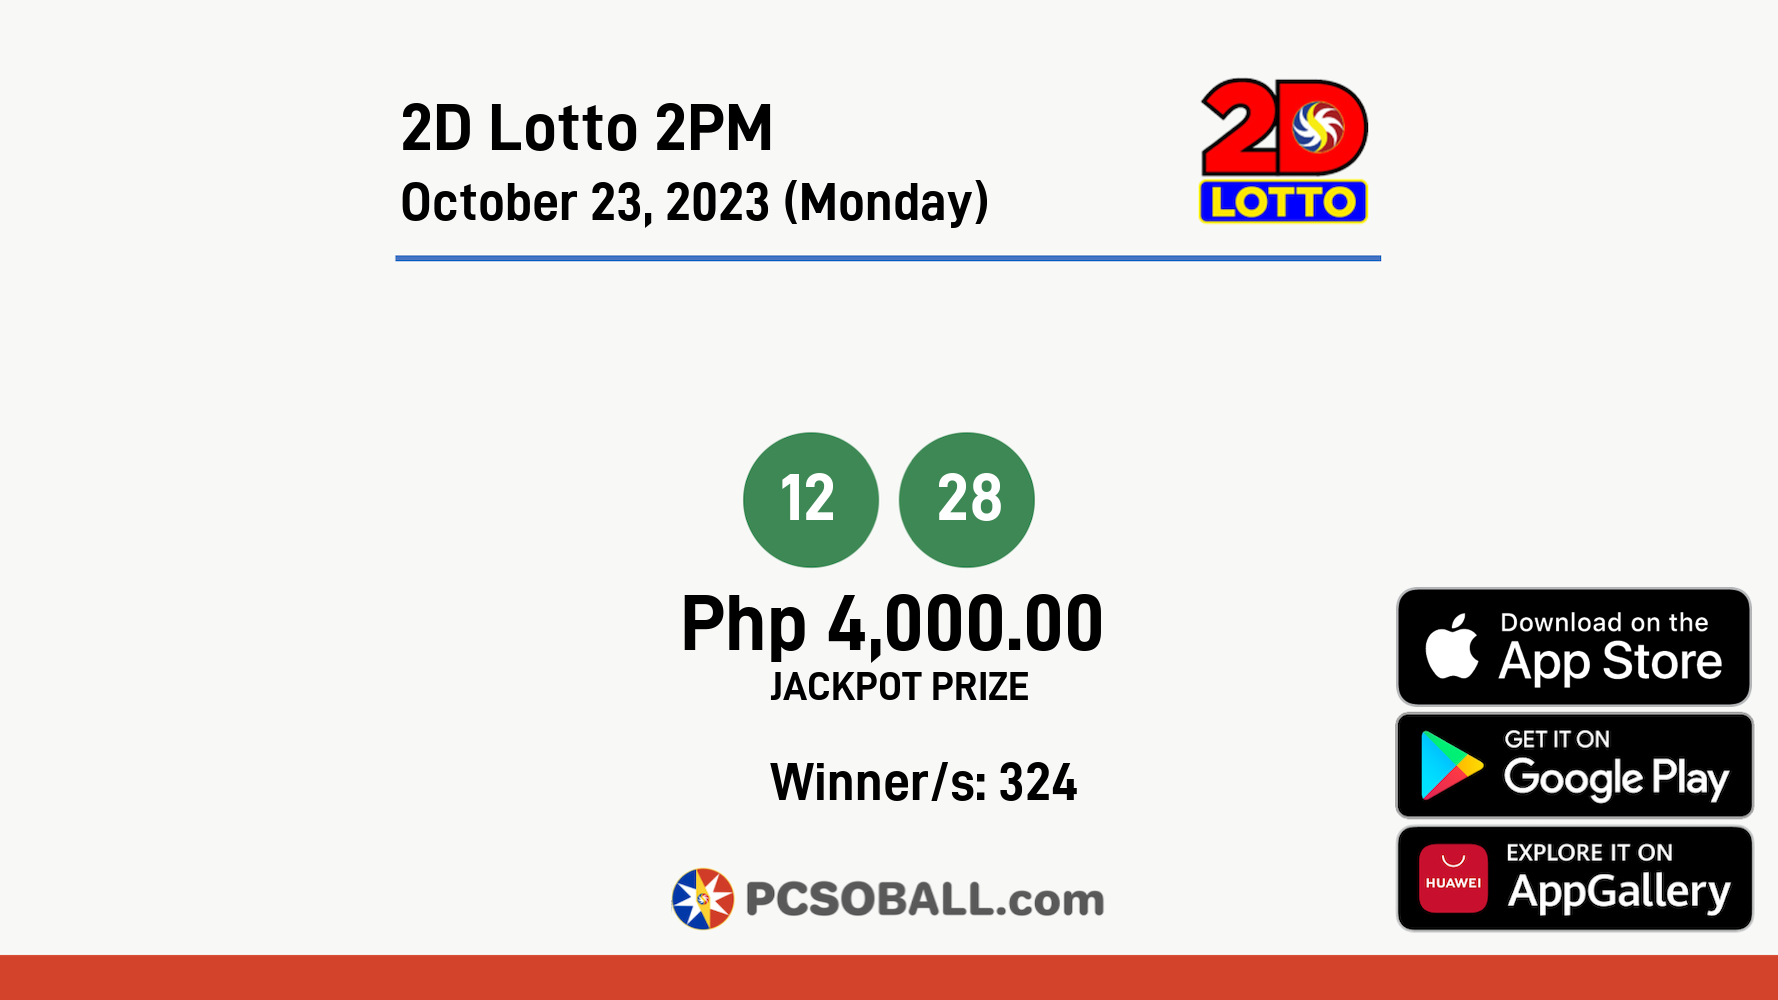 2D Lotto 2PM October 23, 2023 (Monday) Result